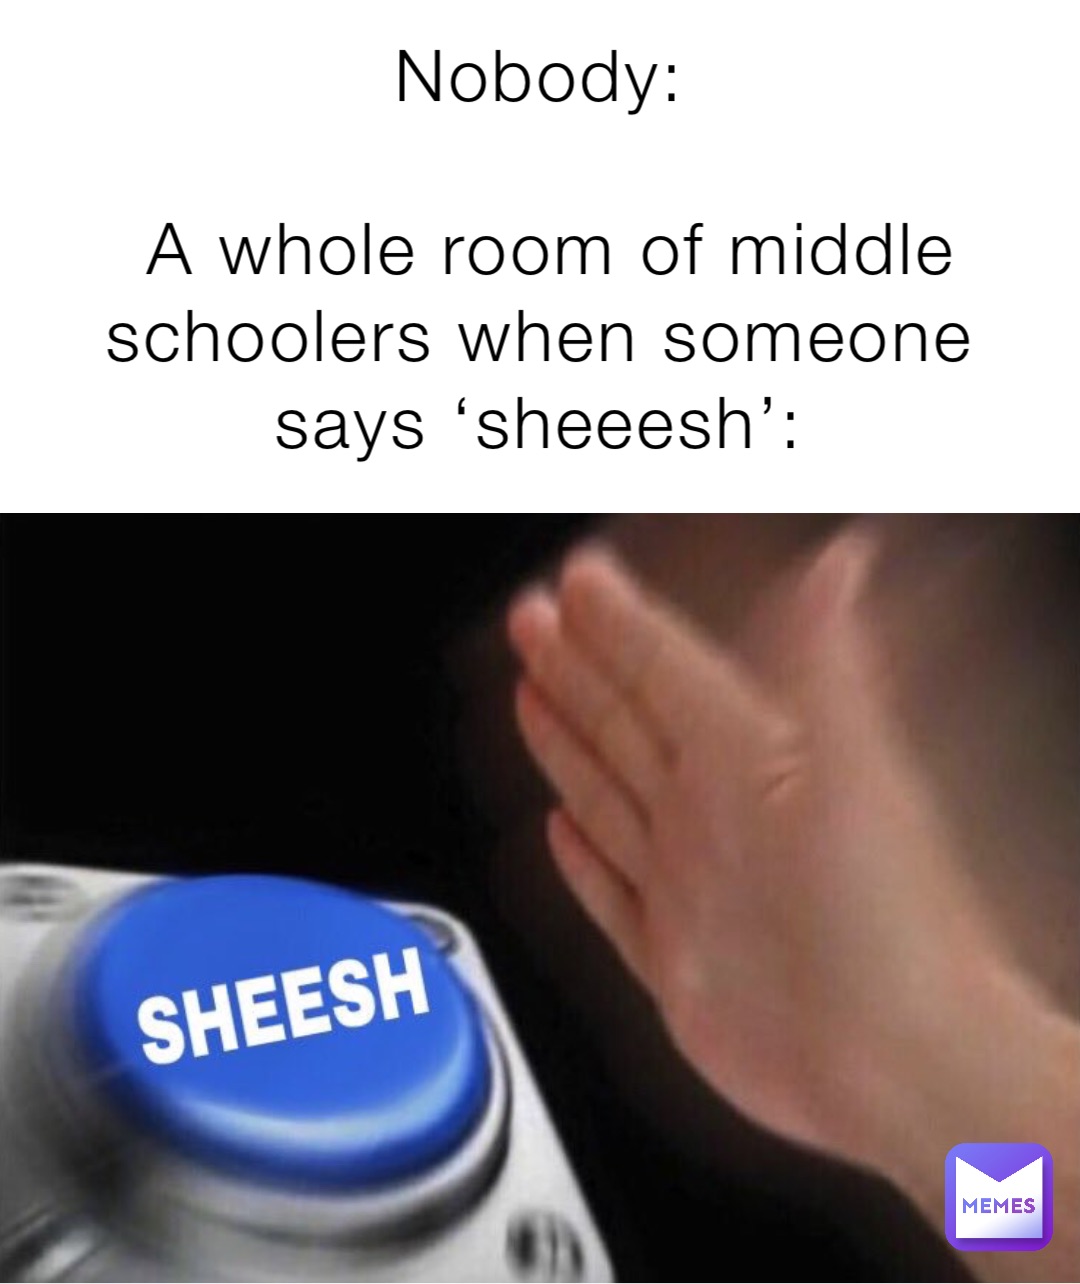 Nobody:

A whole room of middle schoolers when someone says ‘sheeesh’: